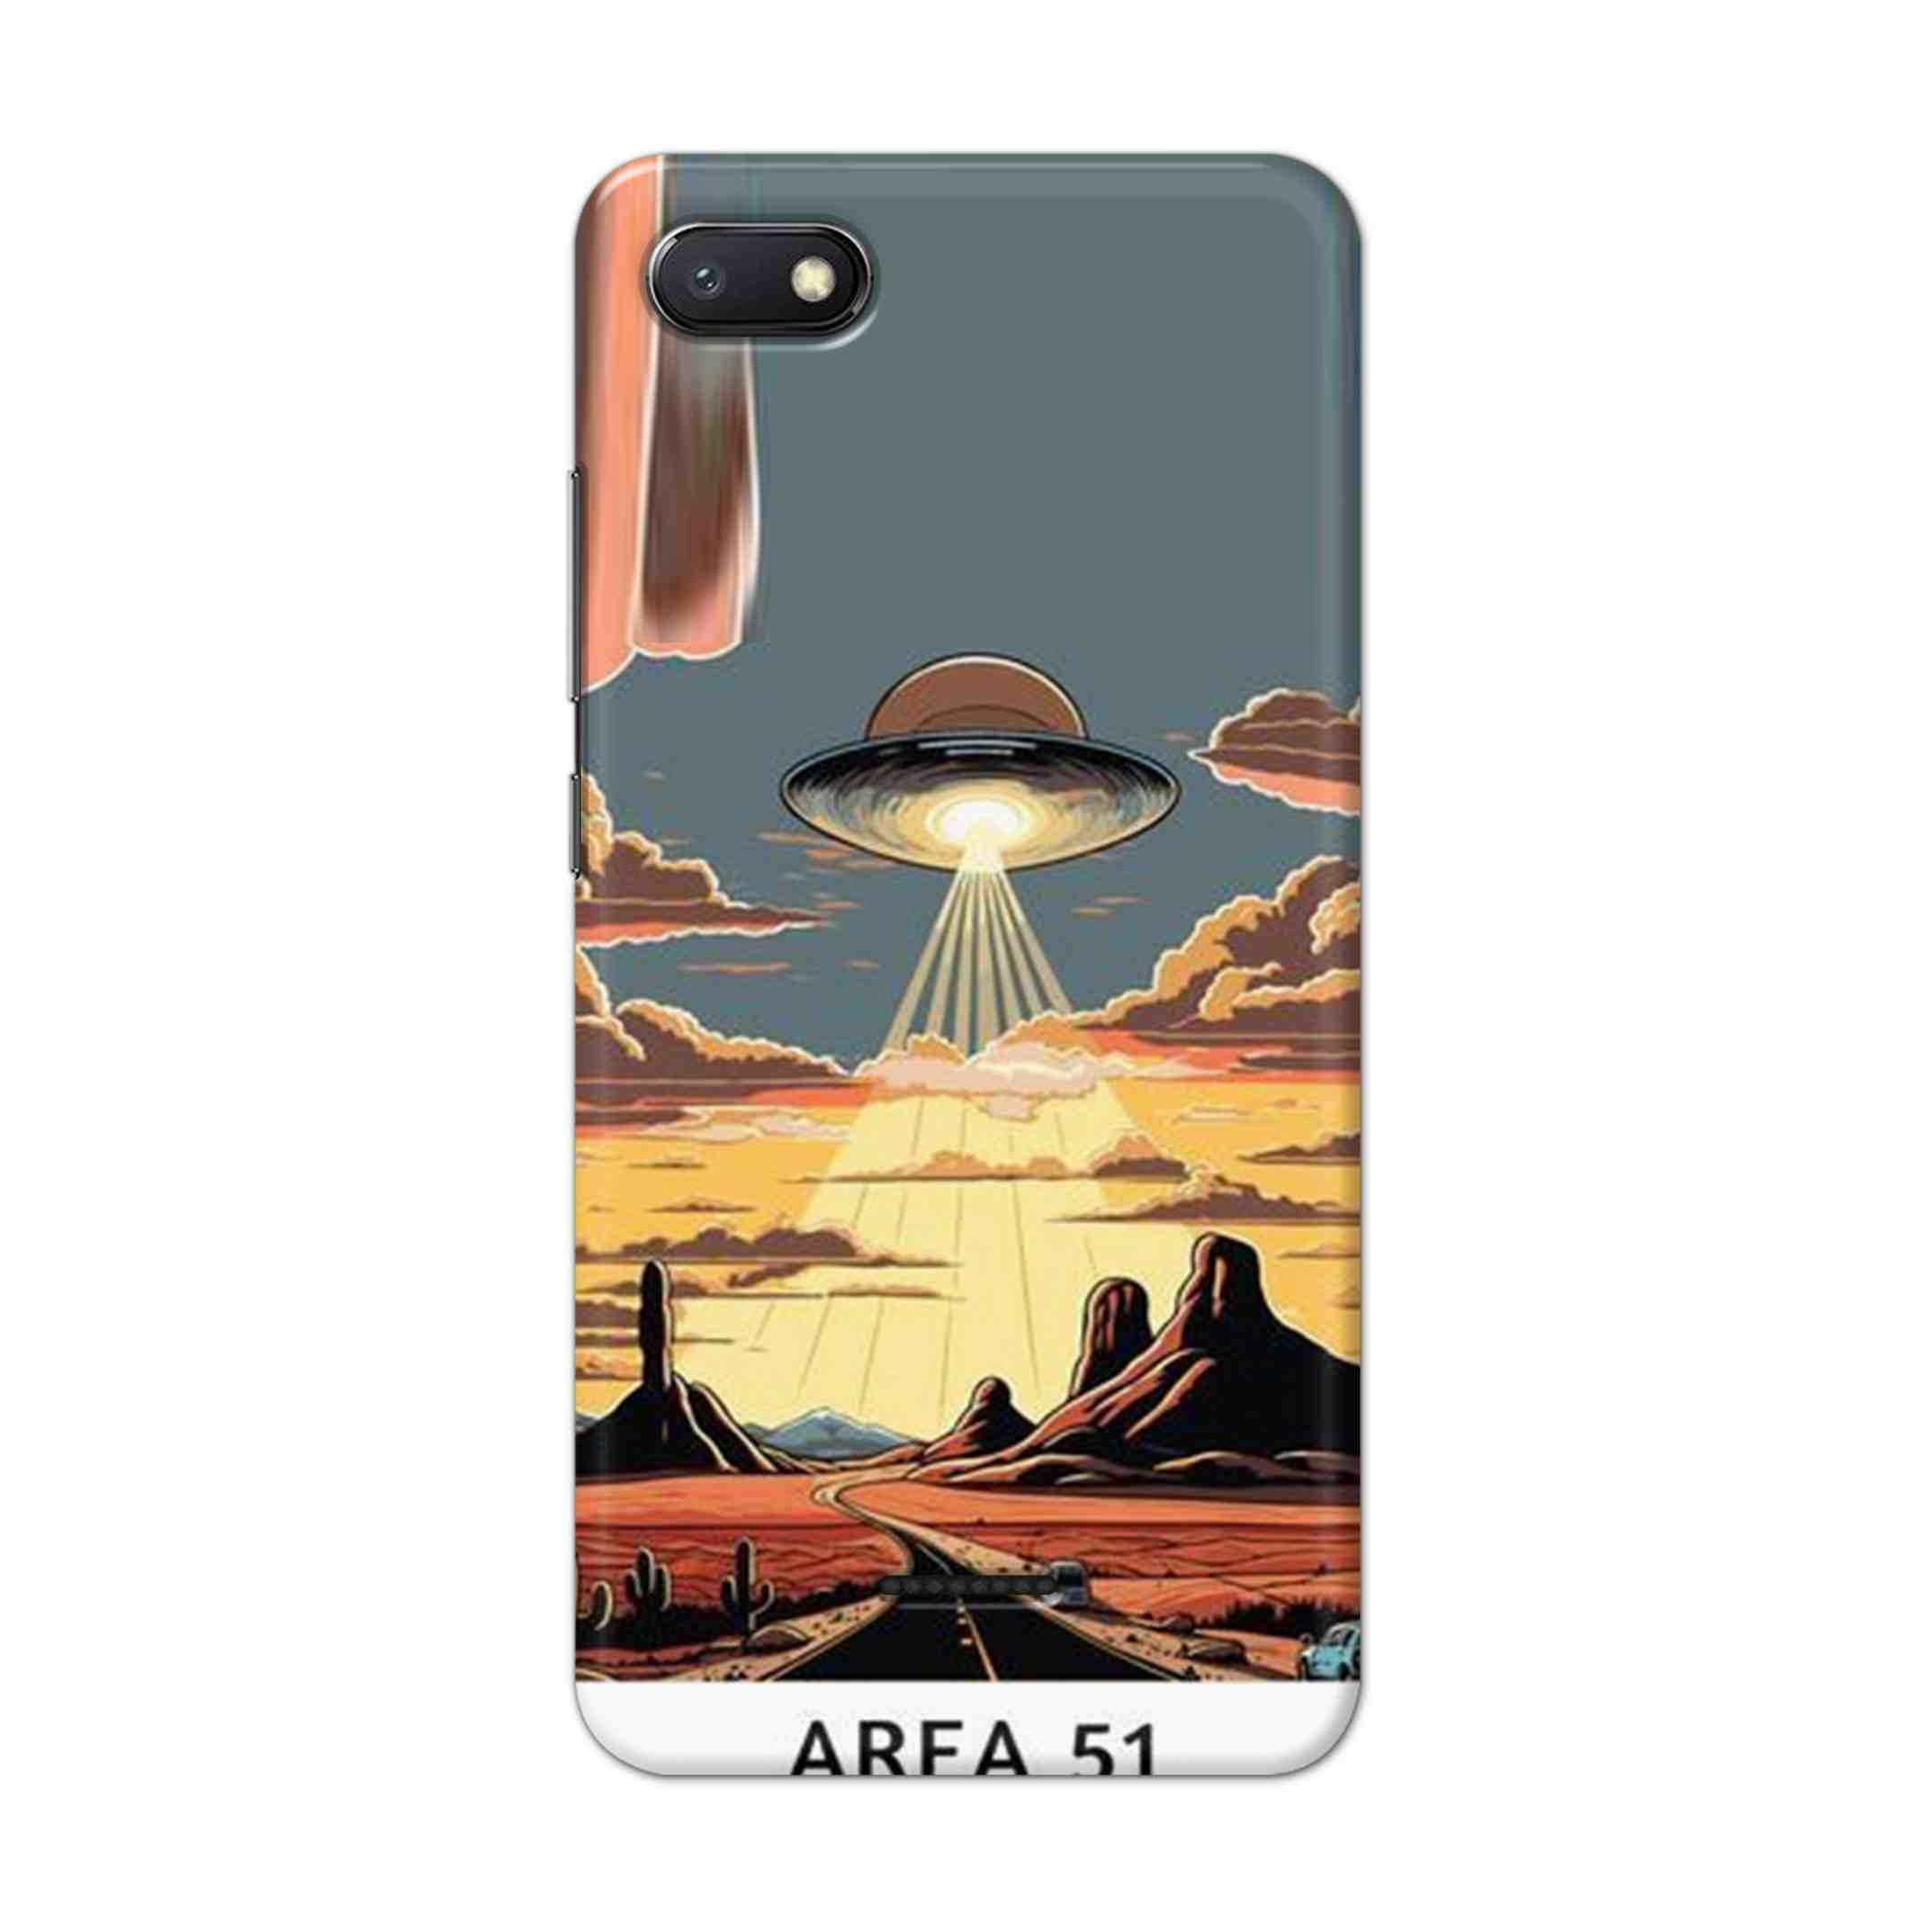 Buy Area 51 Hard Back Mobile Phone Case/Cover For Xiaomi Redmi 6A Online